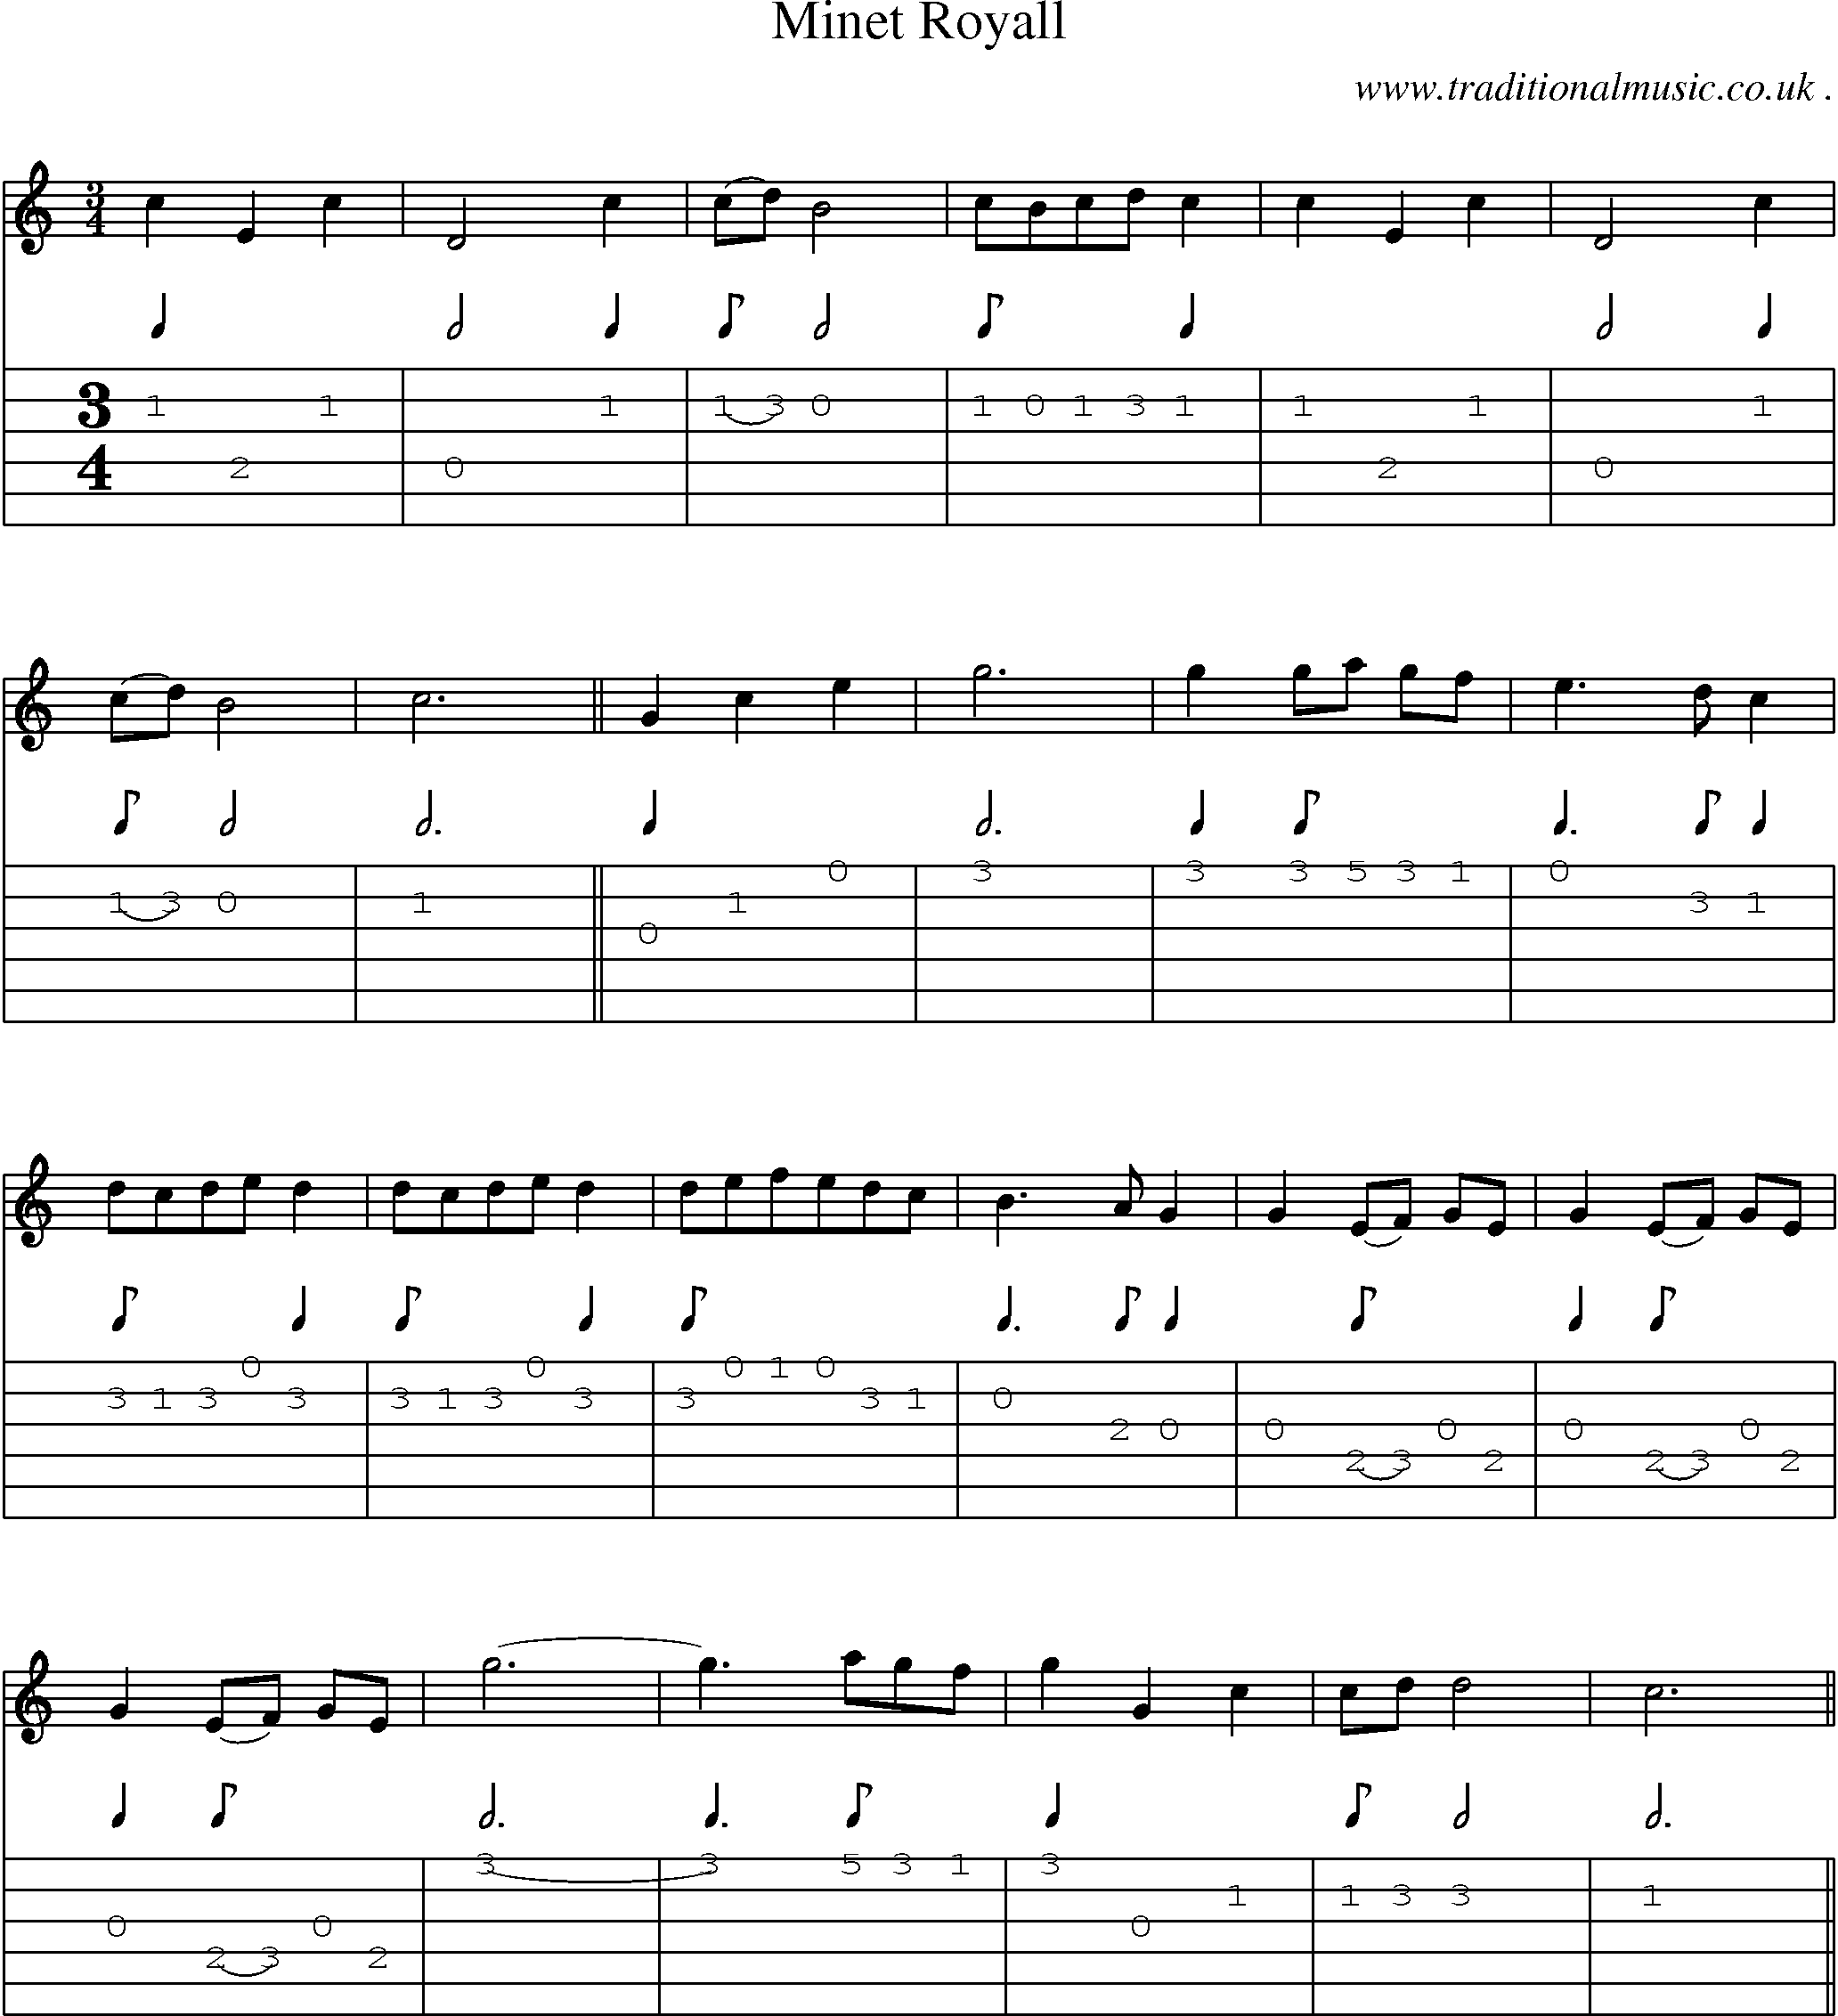 Sheet-Music and Guitar Tabs for Minet Royall